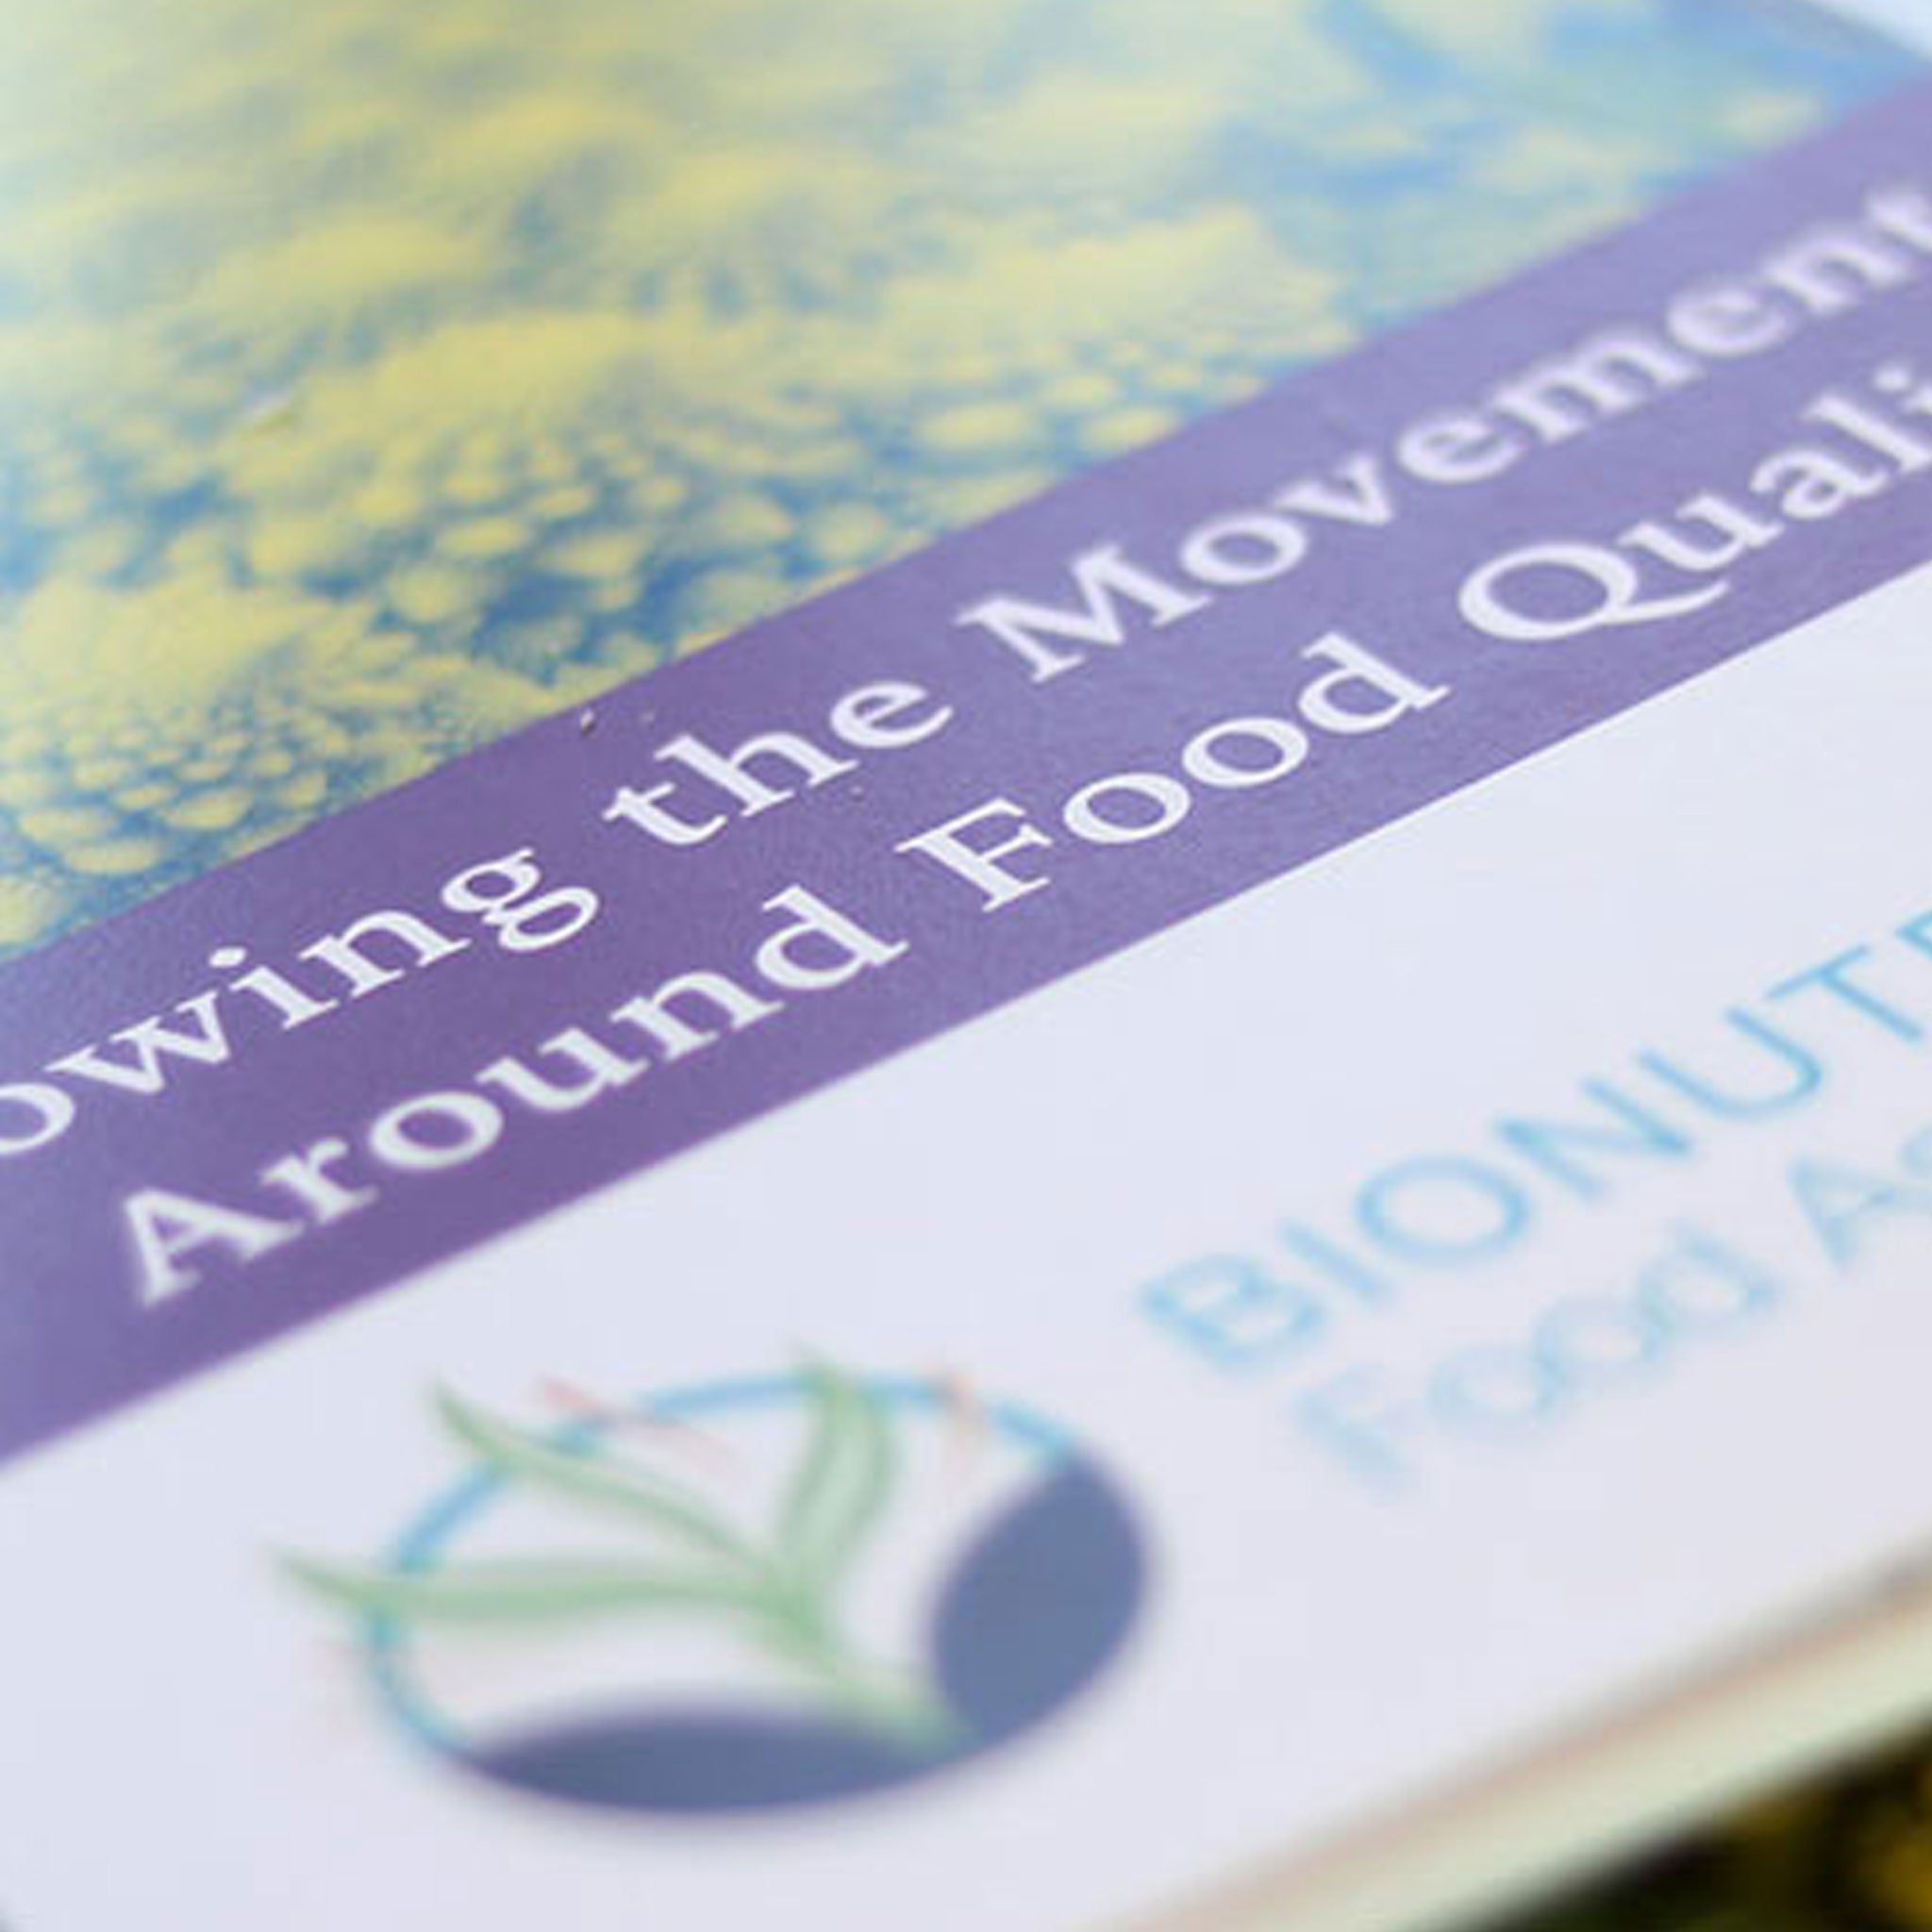 Bionutrient Food Association Soil and Nutrition Conference